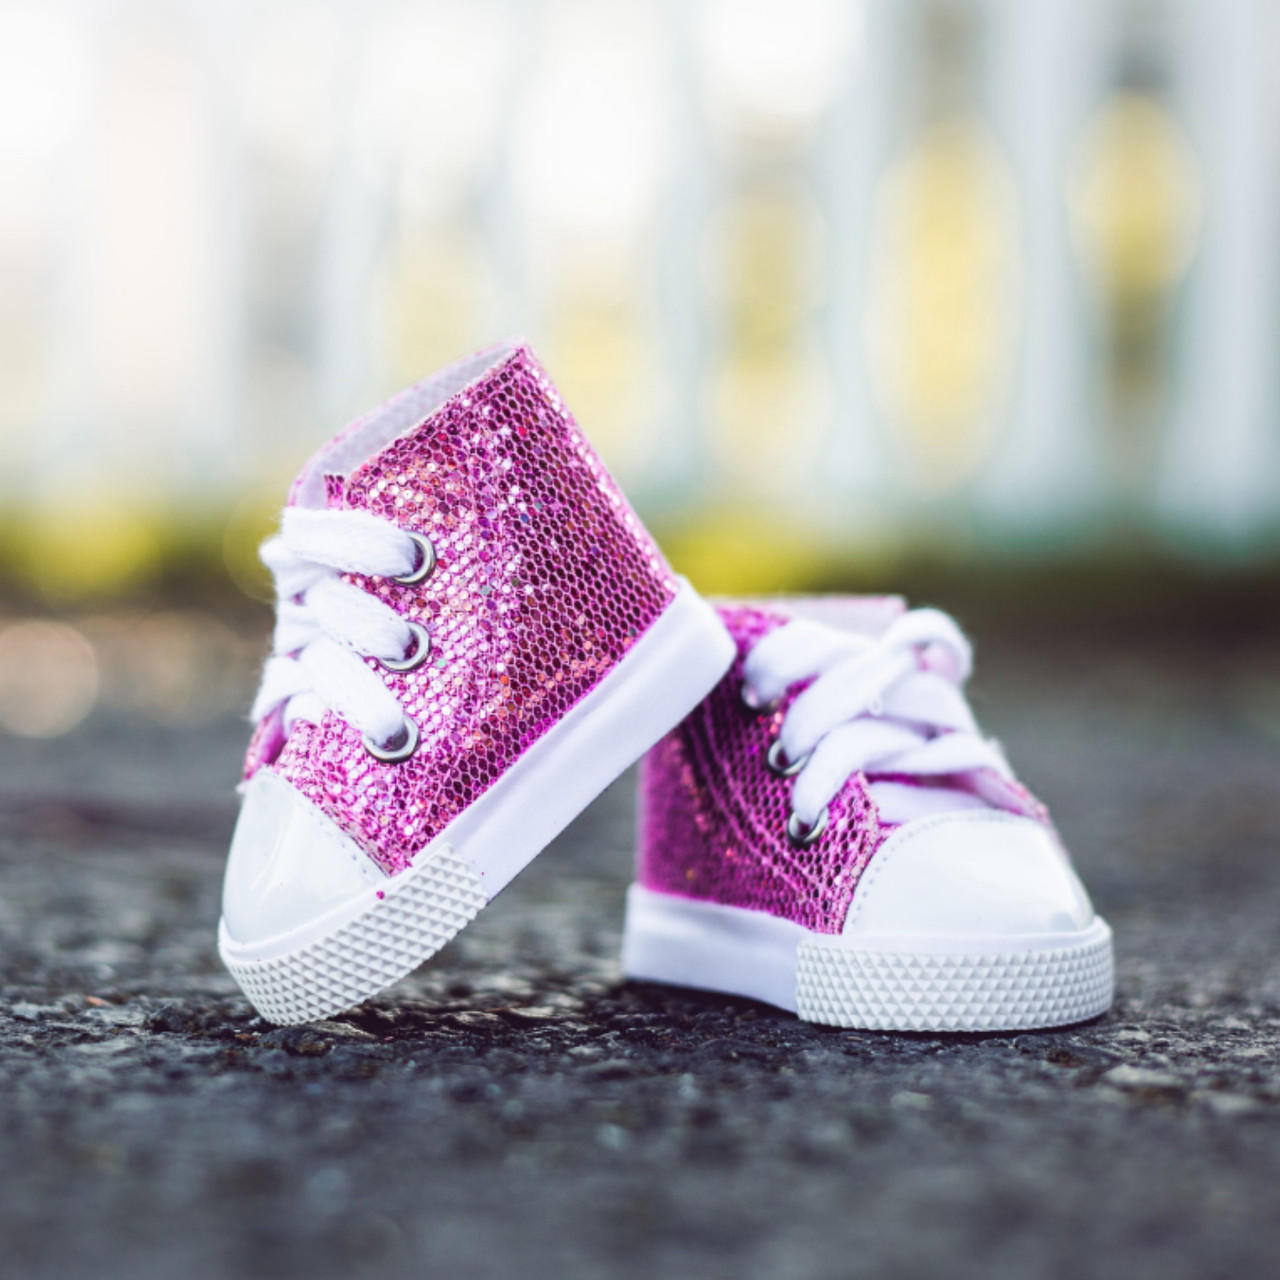 https://cdn11.bigcommerce.com/s-m5vcu70215/images/stencil/1280x1280/products/265/2408/the-queens-treasures-set-of-2-pair-of-glitter-sneaker-shoes-for-18-dolls__07497.1692302651.jpg?c=1